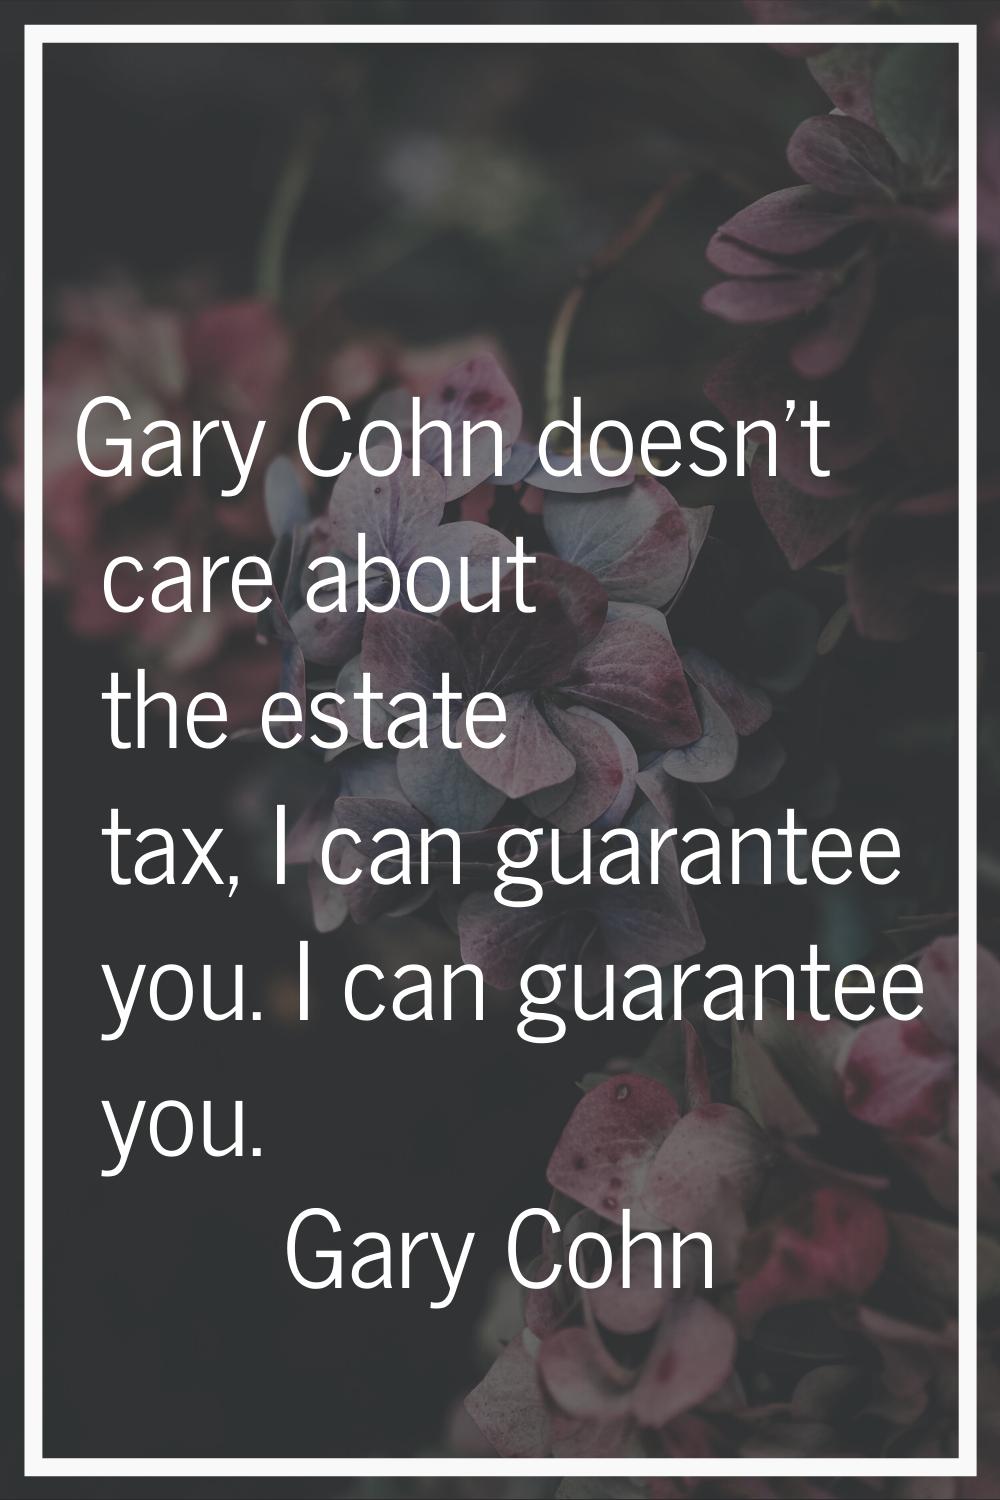 Gary Cohn doesn't care about the estate tax, I can guarantee you. I can guarantee you.